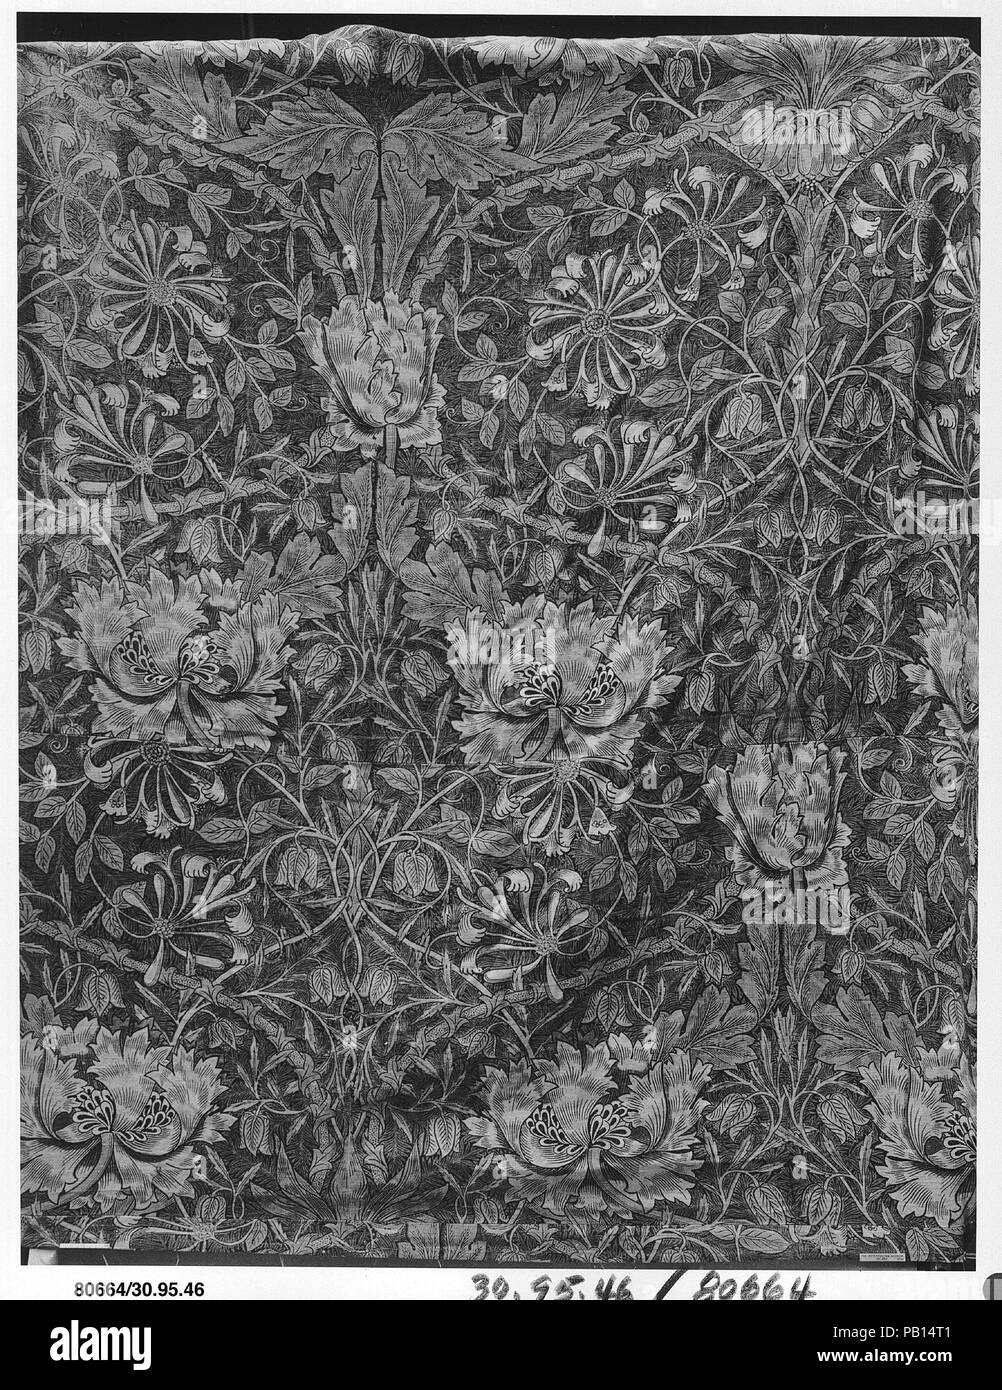 Honeysuckle. Culture: British. Designer: Designed by William Morris (British, Walthamstow, London 1834-1896 Hammersmith, London). Dimensions: Overall ('a' confirmed): 67 x 70 in. (170.2 x 177.8 cm);  Overall ('b' confirmed): 37 3/4 x 53 1/4 in. (95.9 x 135.3 cm);  Overall ('c' confirmed): 60 1/4 x 28 in. (153 x 71.1 cm);  Overall ('d' confirmed): 20 3/4 x 53 3/4 in. (52.7 x 136.5 cm);  Overall ('e' confirmed): 19 x 49 1/2 in. (48.3 x 125.7 cm);  Overall ('f' confirmed): 2 3/4 x 55 in. (7 x 139.7 cm);  Overall (assembled): 67 x 60 in. (170.2 x 152.4 cm). Date: design registered 1876, printed 18 Stock Photo